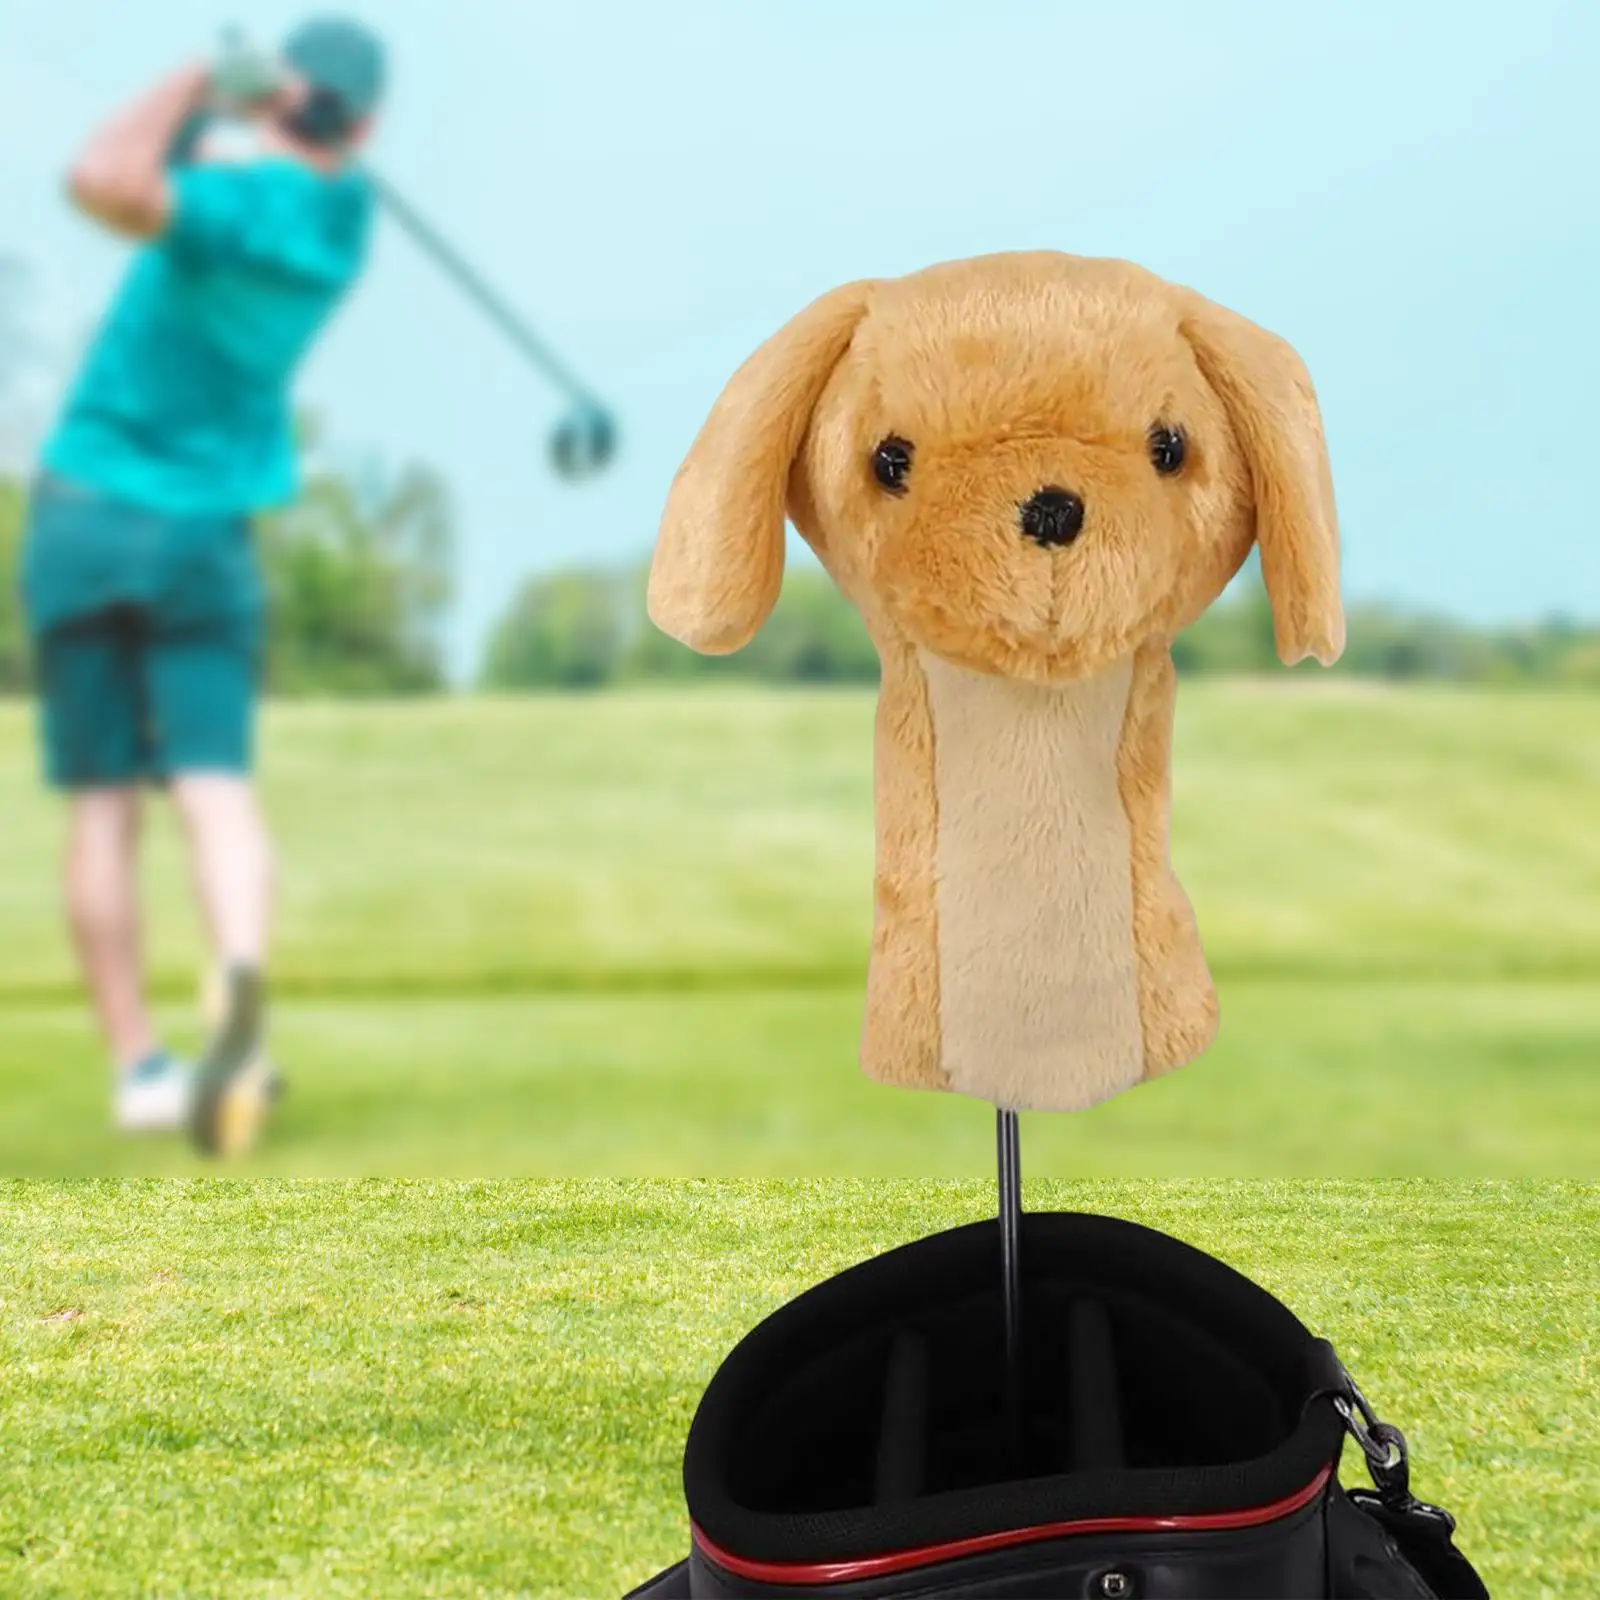 

Dog Shaped Club Head Covers Travel Transport Giveaway Anti Scratch Equipment Exquisite Golf Wood Headcover Protector Golfer Gift